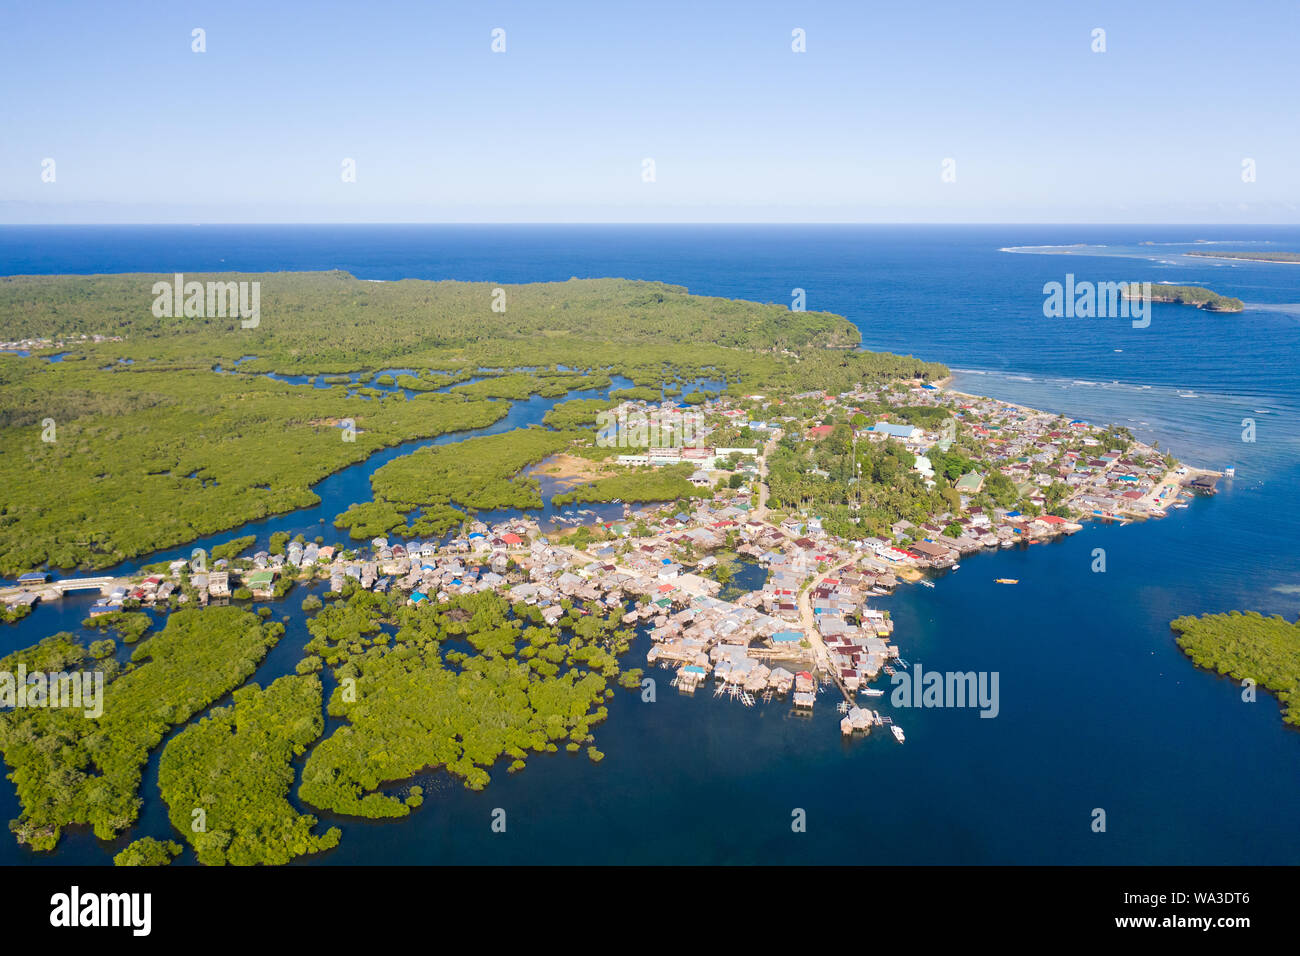 Town on the water and mangroves, top view. Coast of the island of Siargao. Tropical landscape. Stock Photo